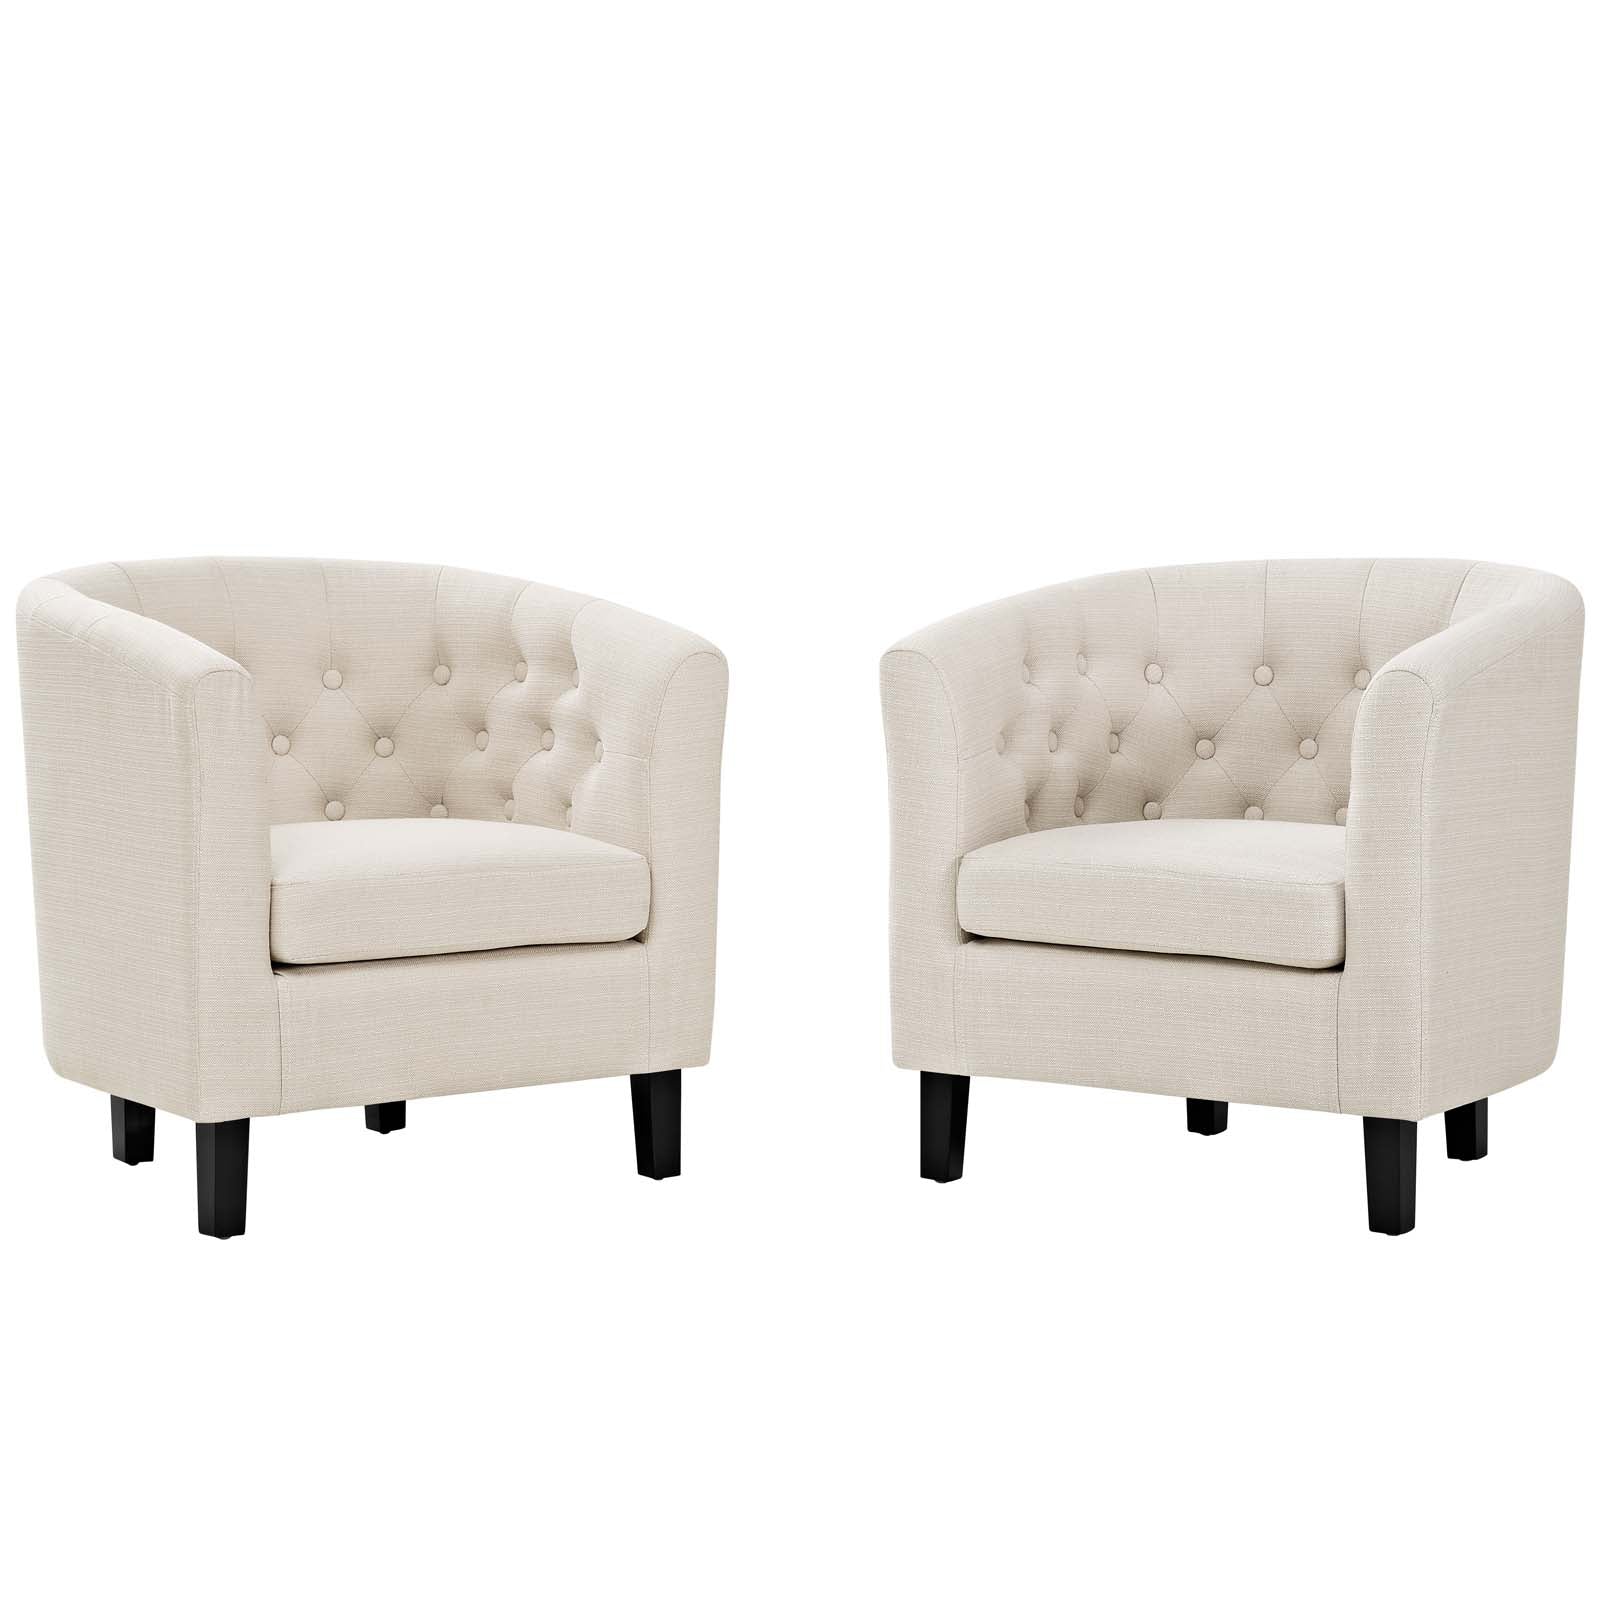 Modway Accent Chairs - Prospect 2 Piece Upholstered Fabric Armchair Set Beige